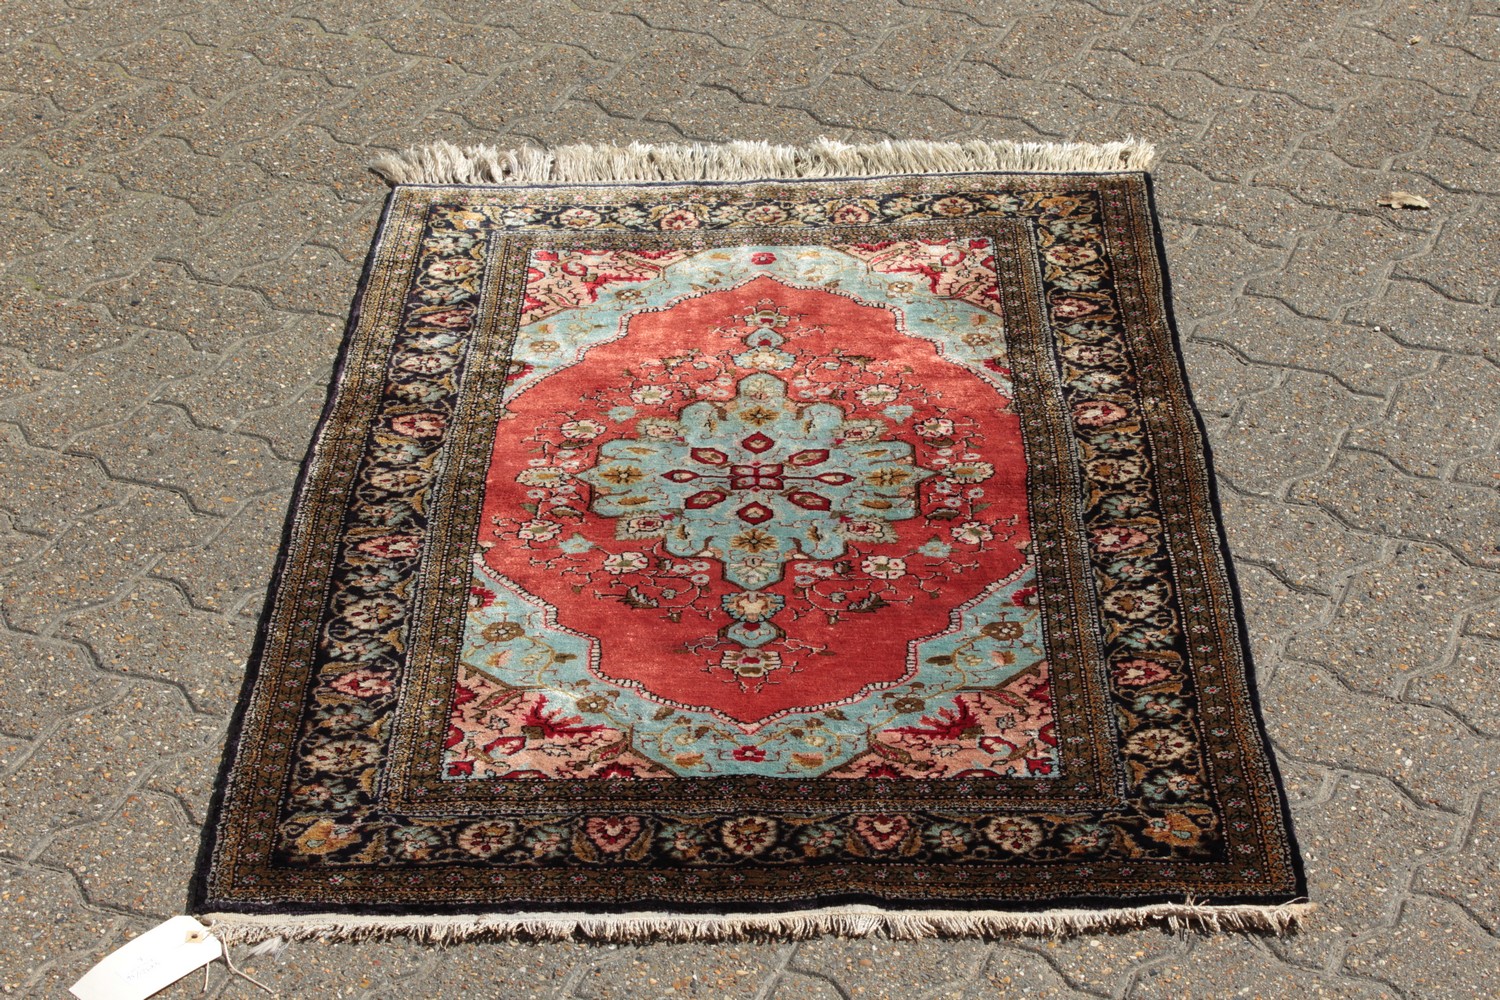 A FINE PERSIAN SILK RUG with central motif on a red background and floral border. 4ft 2ins x 2ft - Image 2 of 9